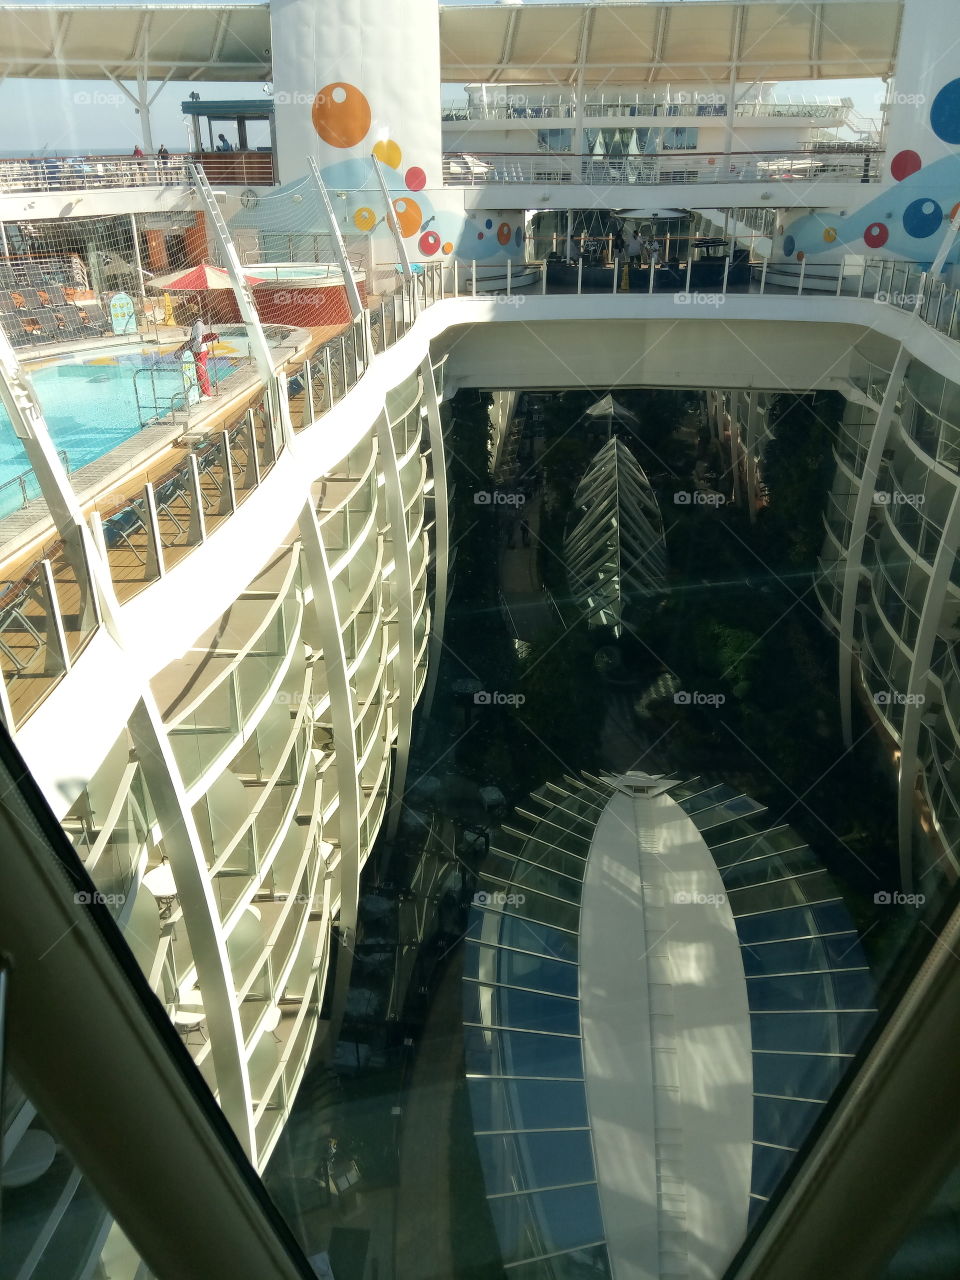 Oasis of the seas biggest cruise ship